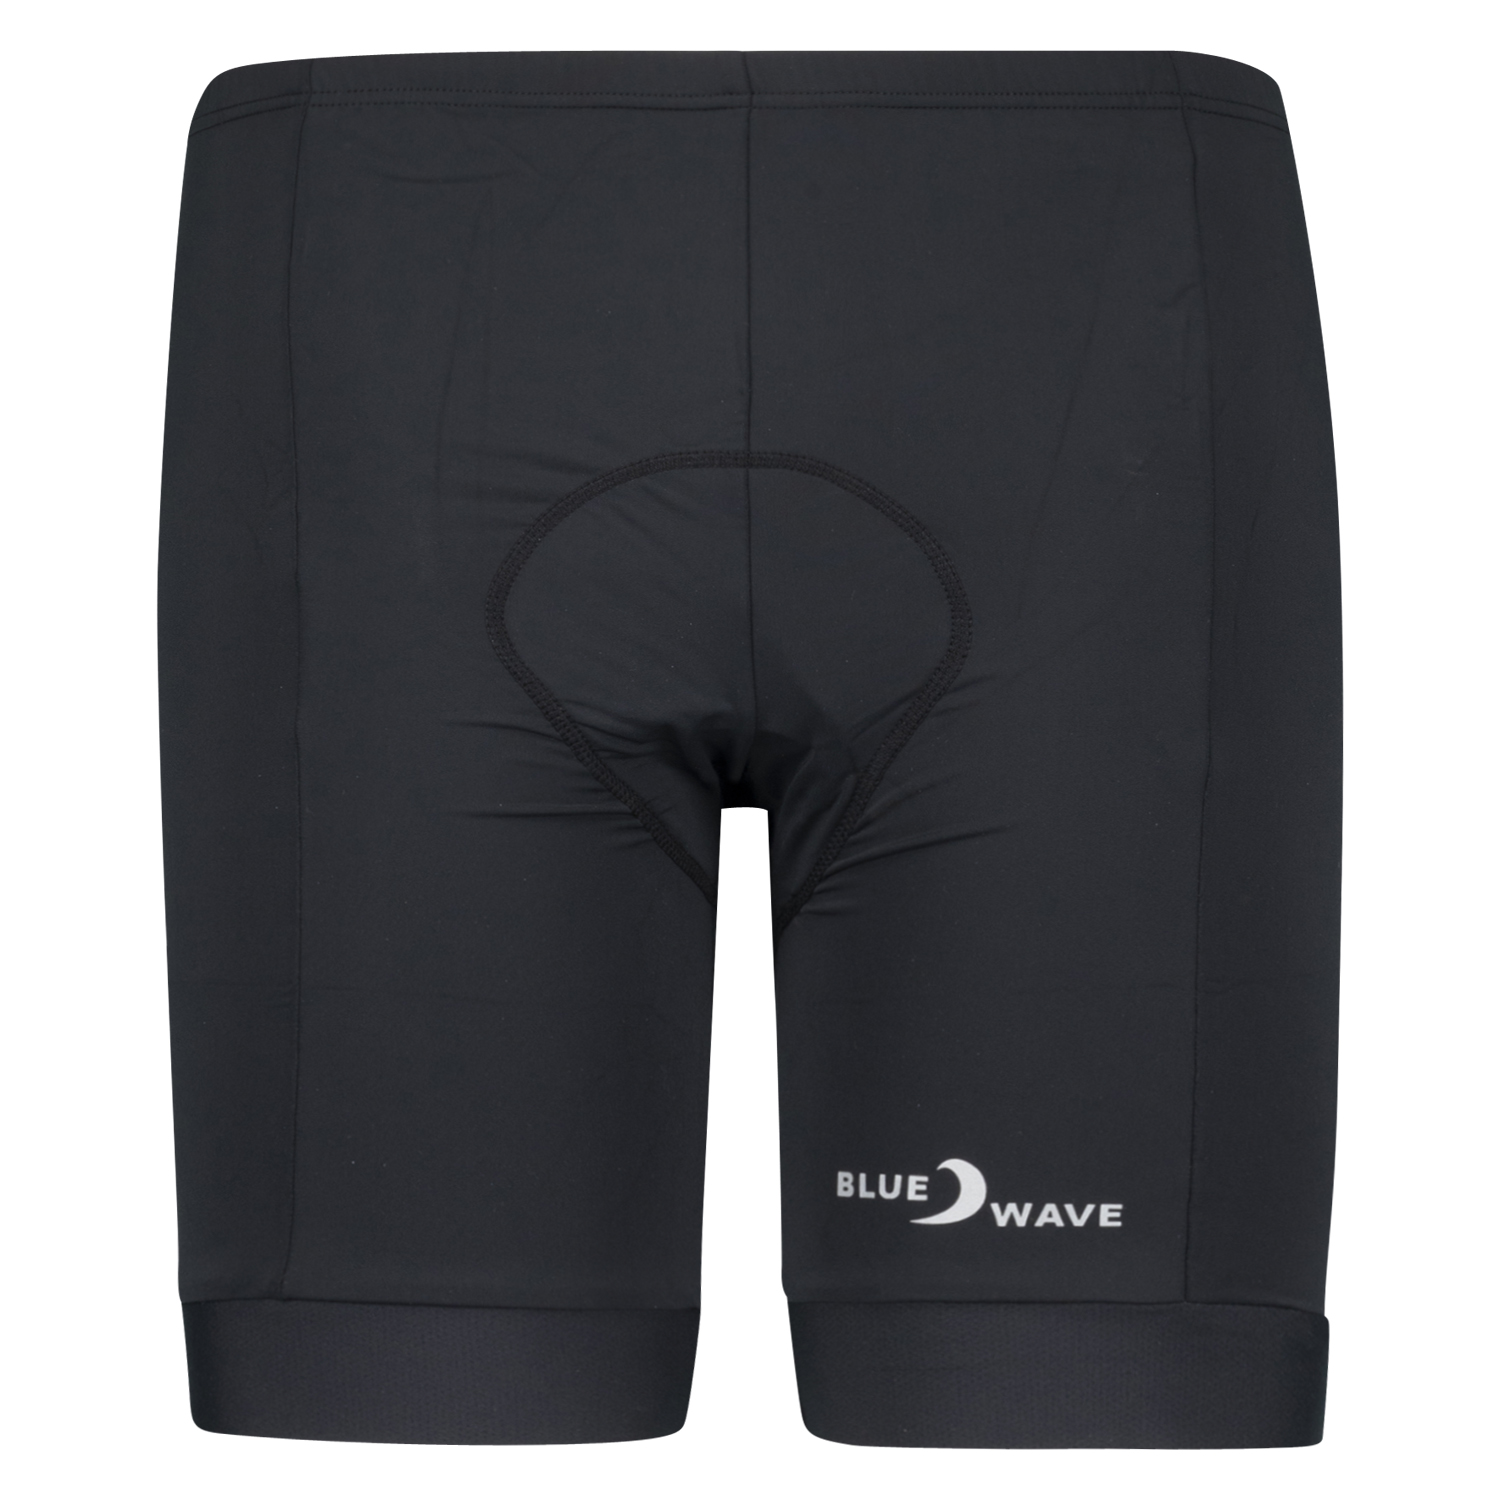 Bike shorts "André" in black by Blue Wave for men up to oversize 8XL